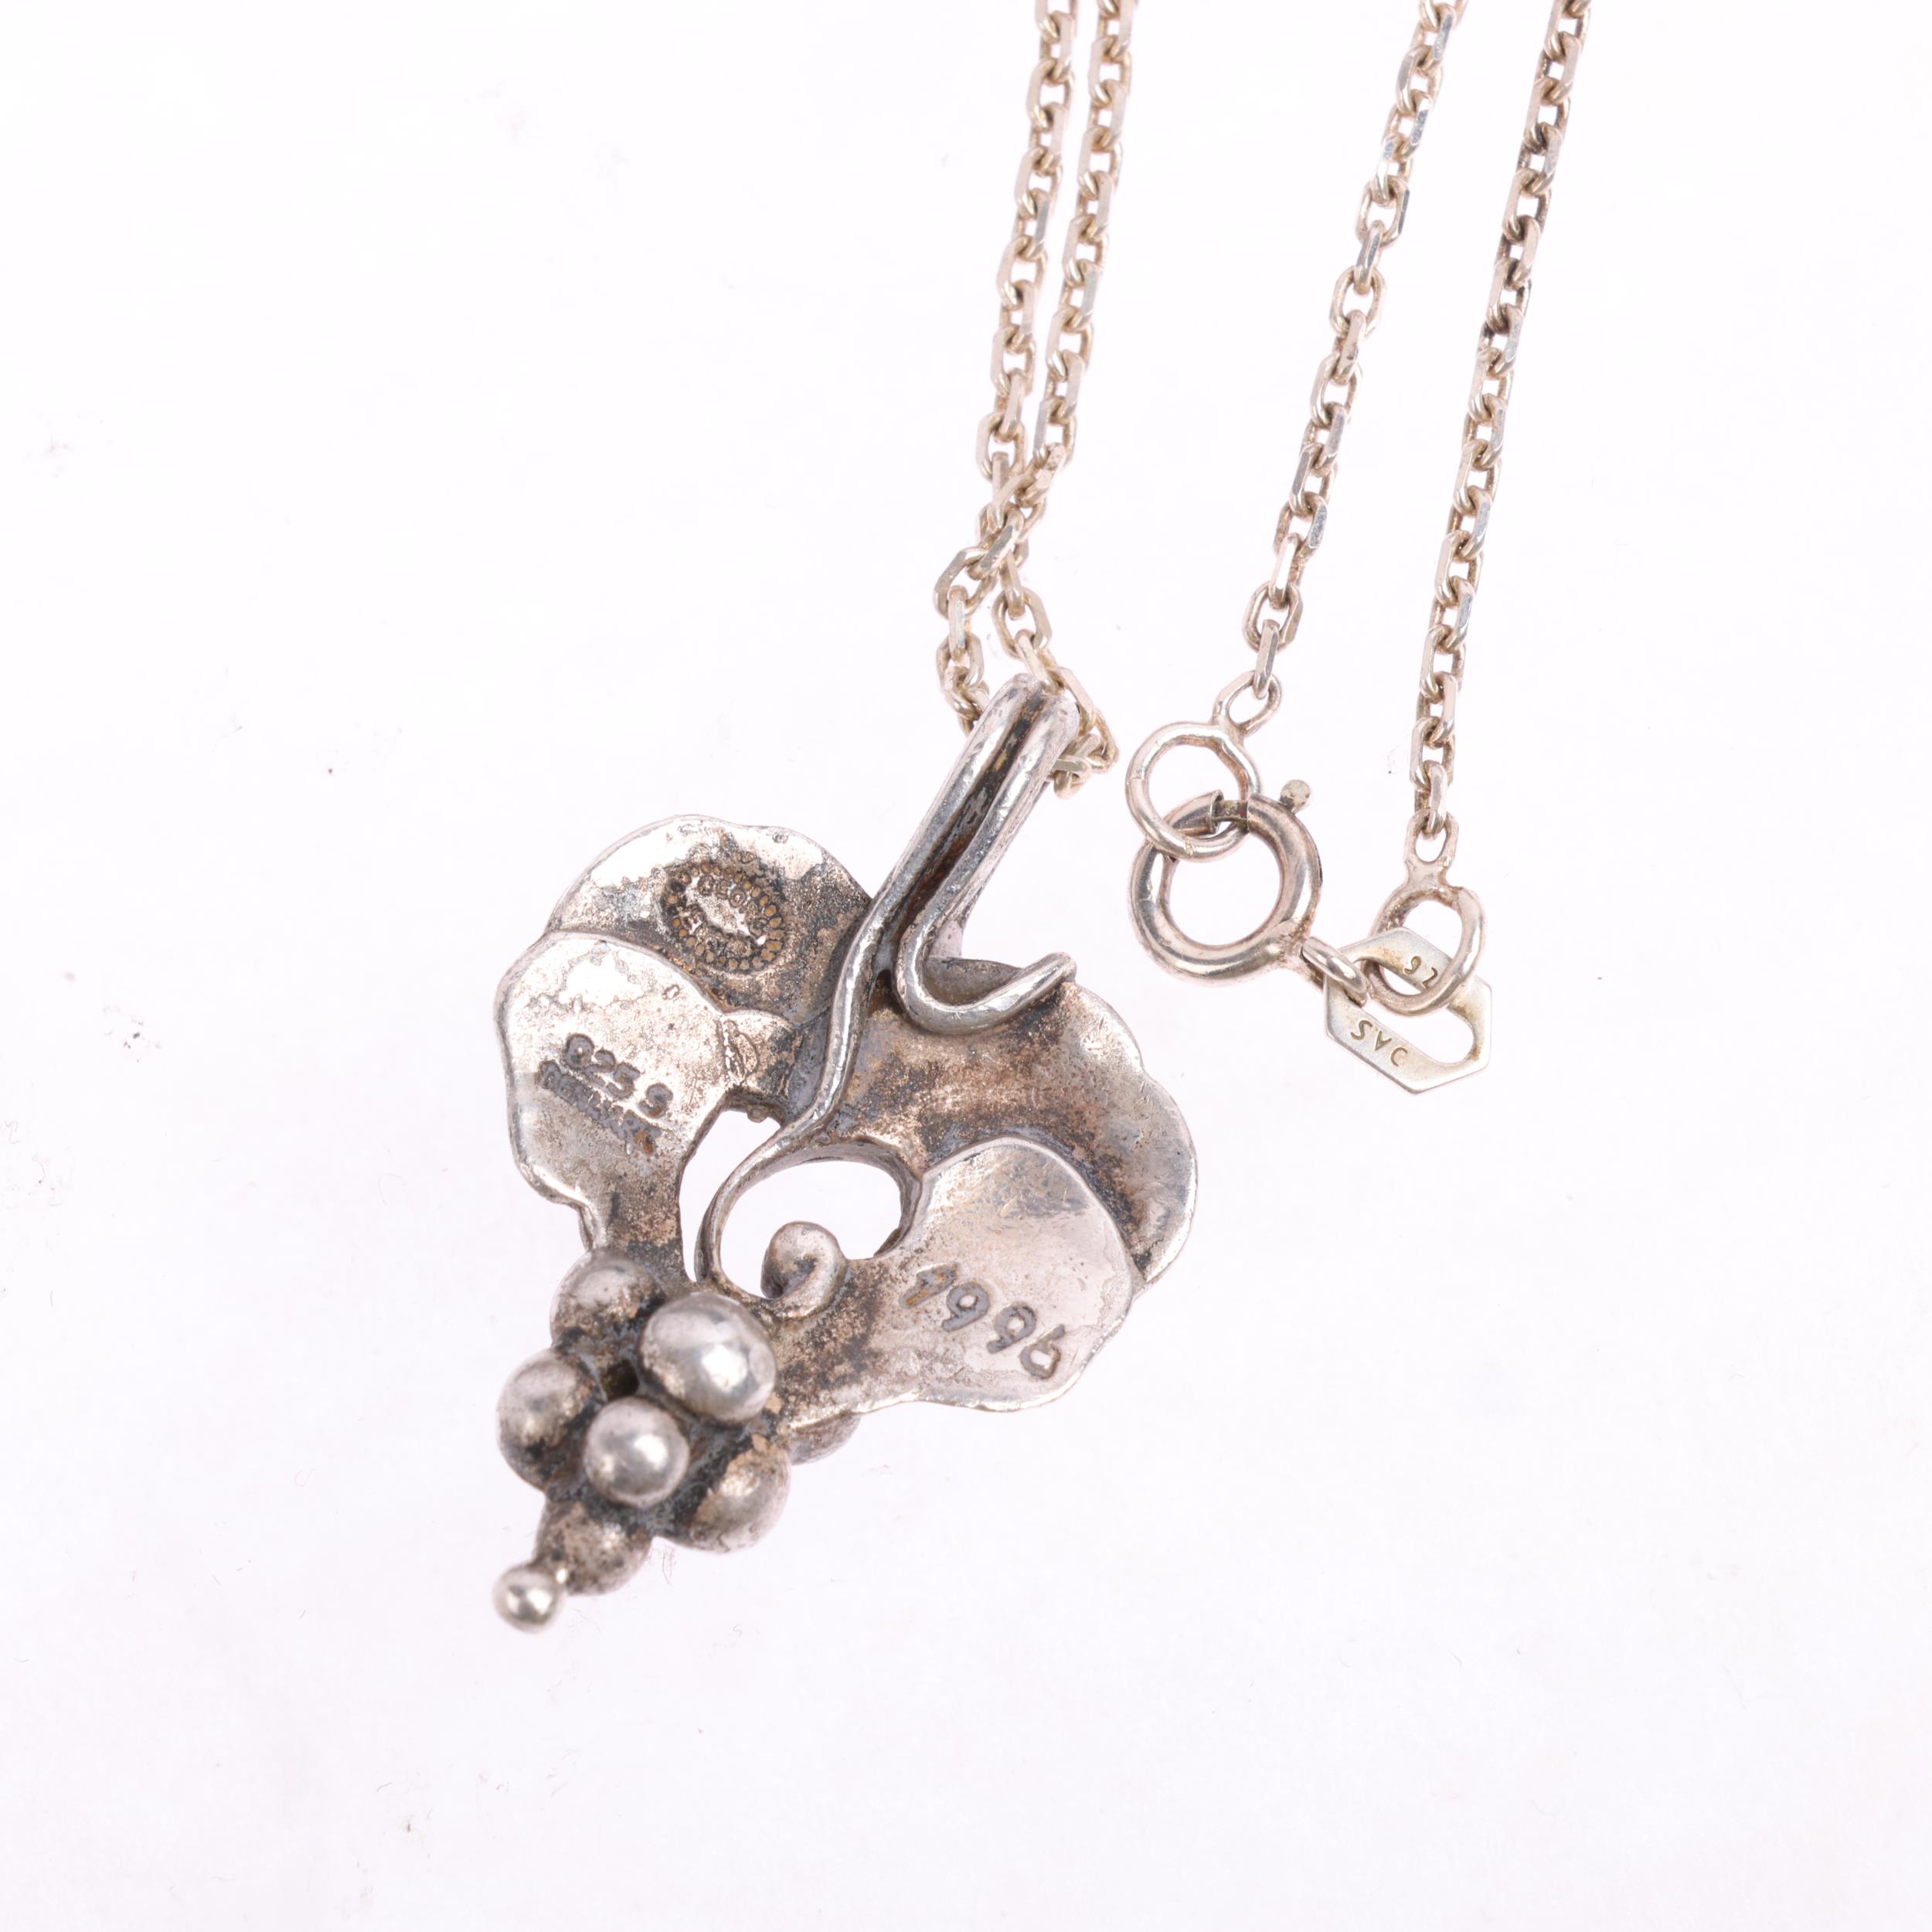 GEORG JENSEN - an Art Nouveau style Danish sterling silver Pendant Of The Year 1996 necklace, on - Image 3 of 3